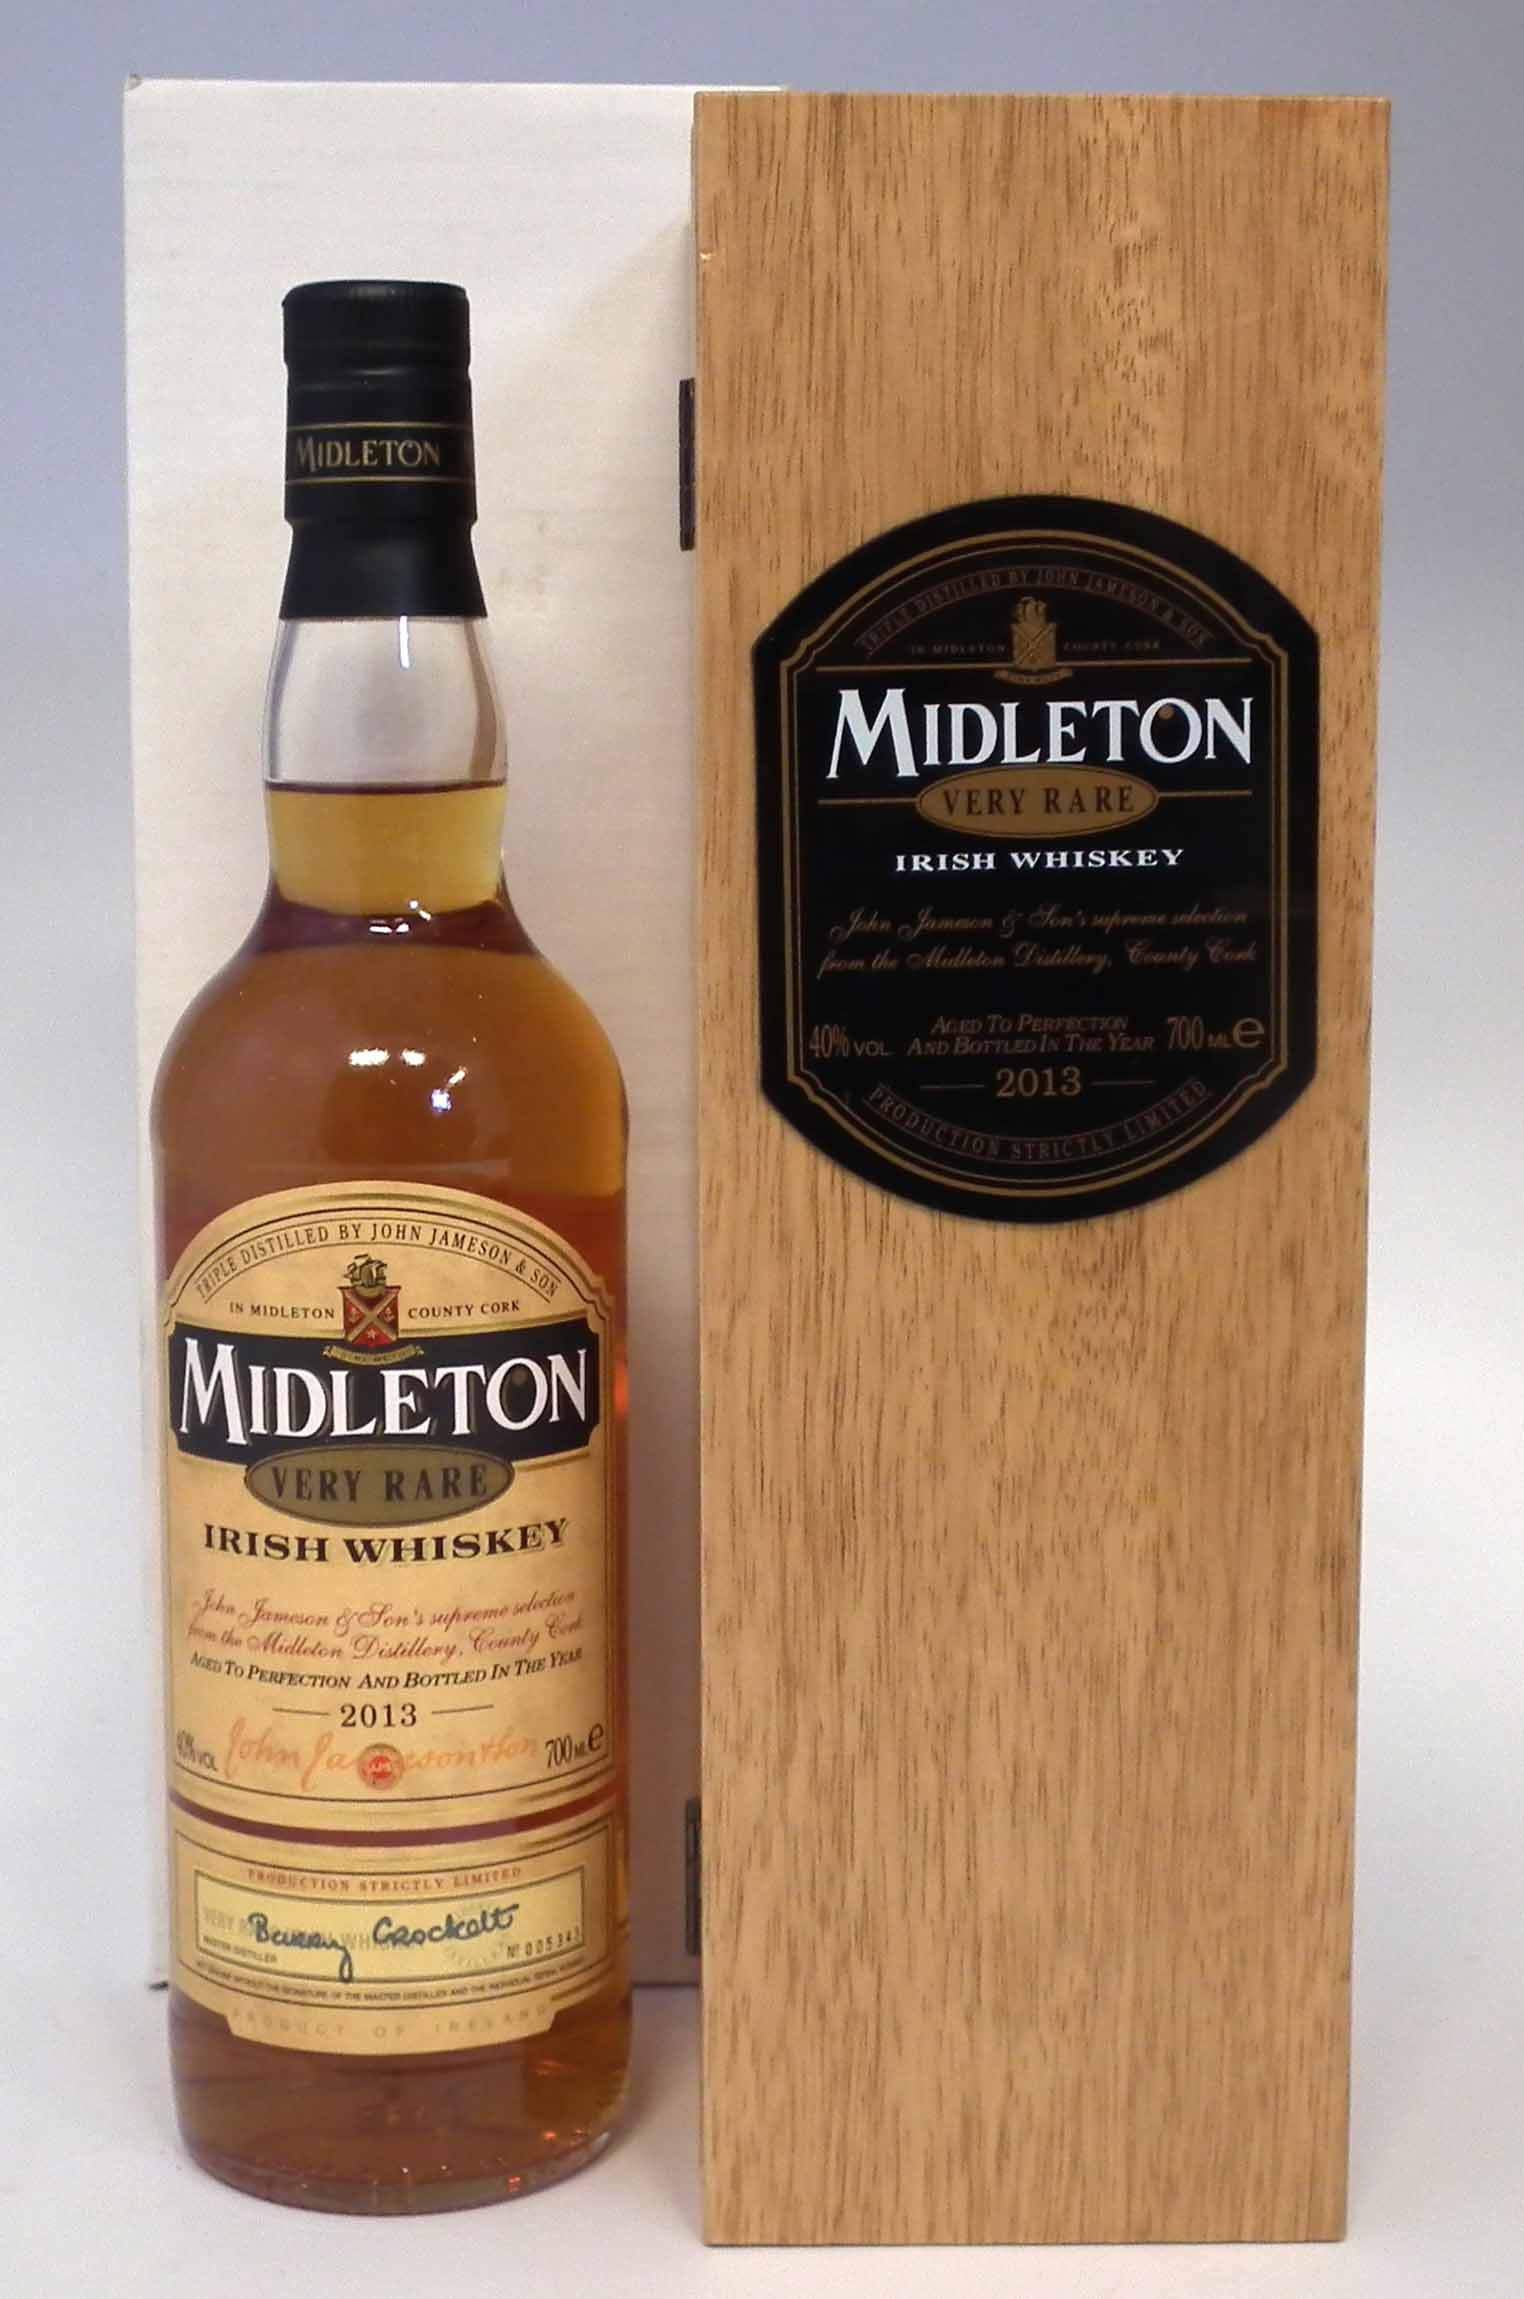 Midleton Very Rare Irish Whiskey - 2013 - 700ml number 5343 with wood box, card case, certificate